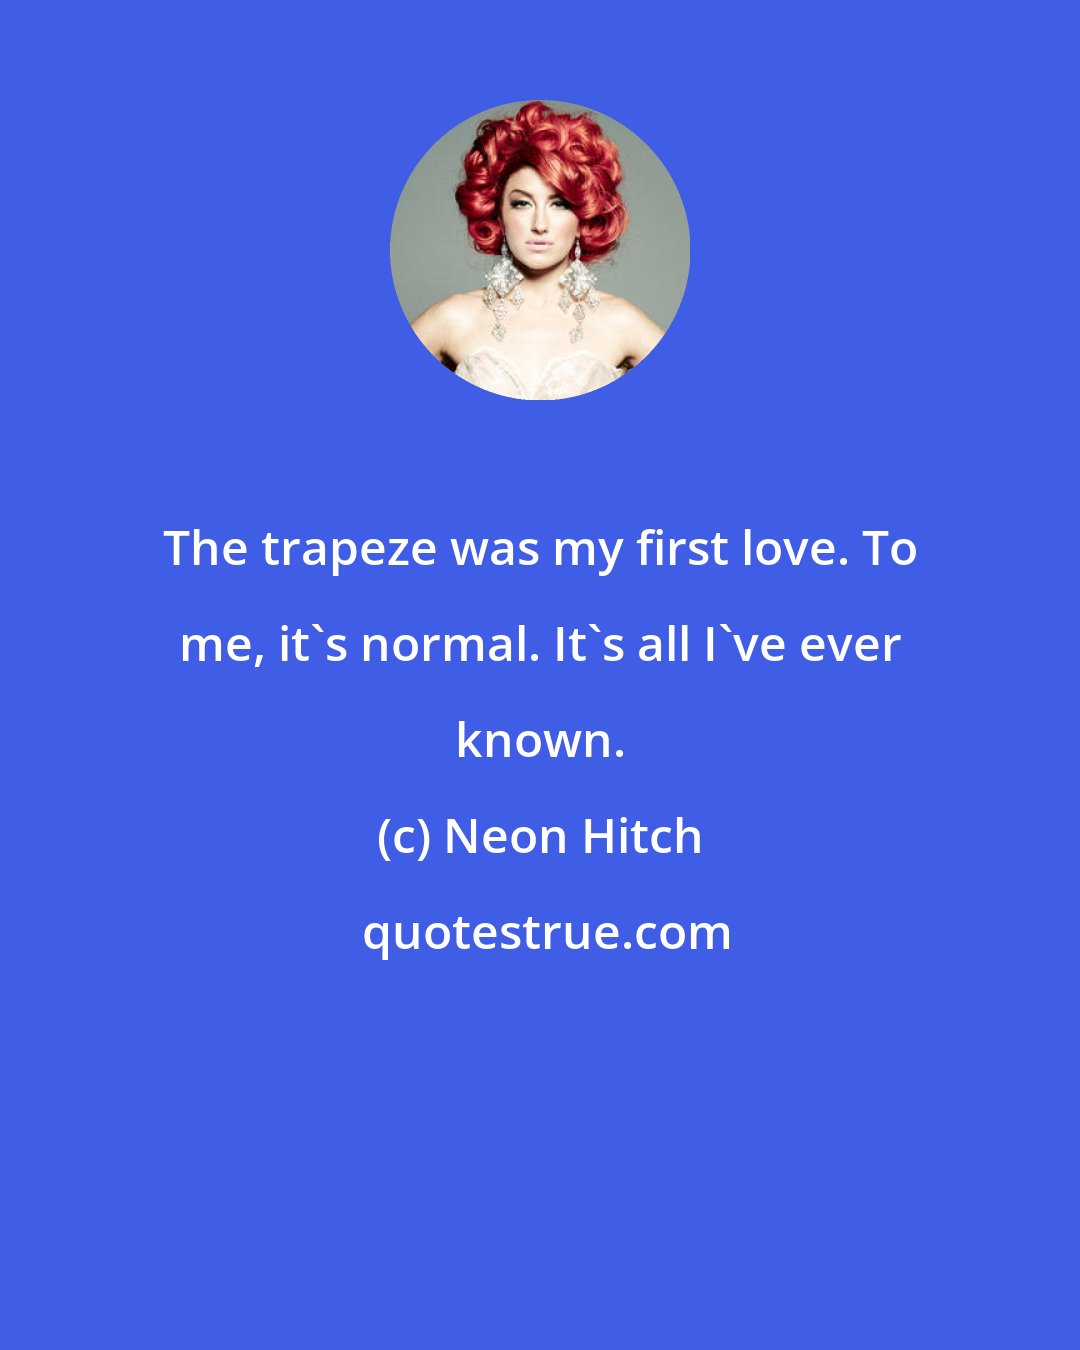 Neon Hitch: The trapeze was my first love. To me, it's normal. It's all I've ever known.